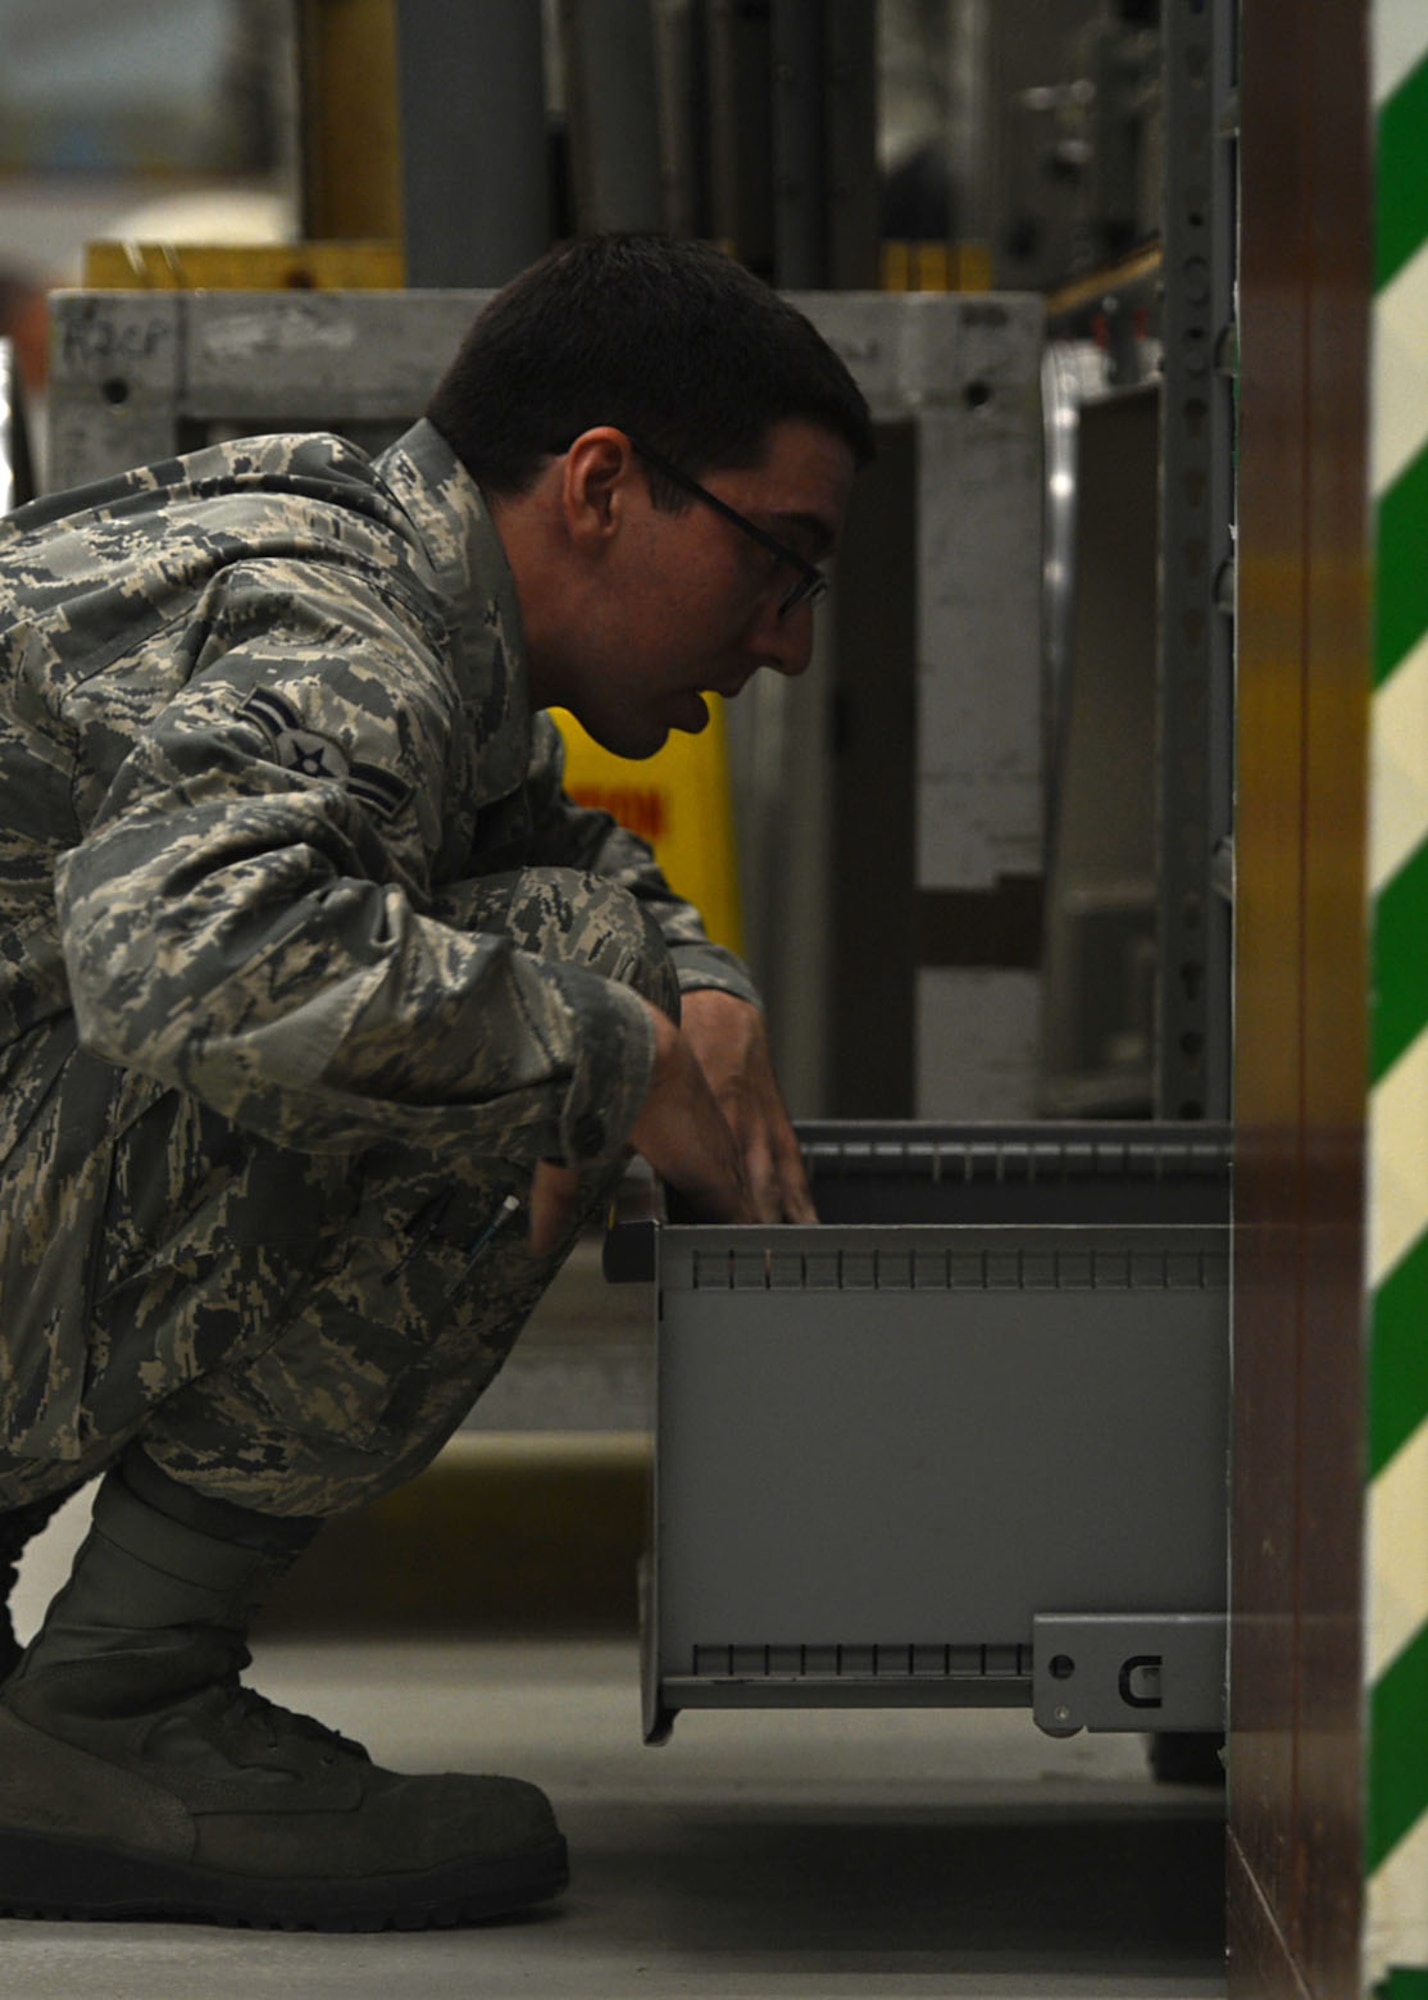 U.S. Air Force Airman 1st Class Layne Jennings, 20th Component Maintenance Squadron (CMS) electronic warfare (EW) team member, searches for tools at the EW work center at Shaw Air Force Base, S.C., July 21, 2017. Airmen assigned to the 20th CMS EW flight utilize a variety of tools to include, digital multimeters, torque wrenches and scatter network machines. (U.S. Air Force photo by Senior Airman Christopher Maldonado)